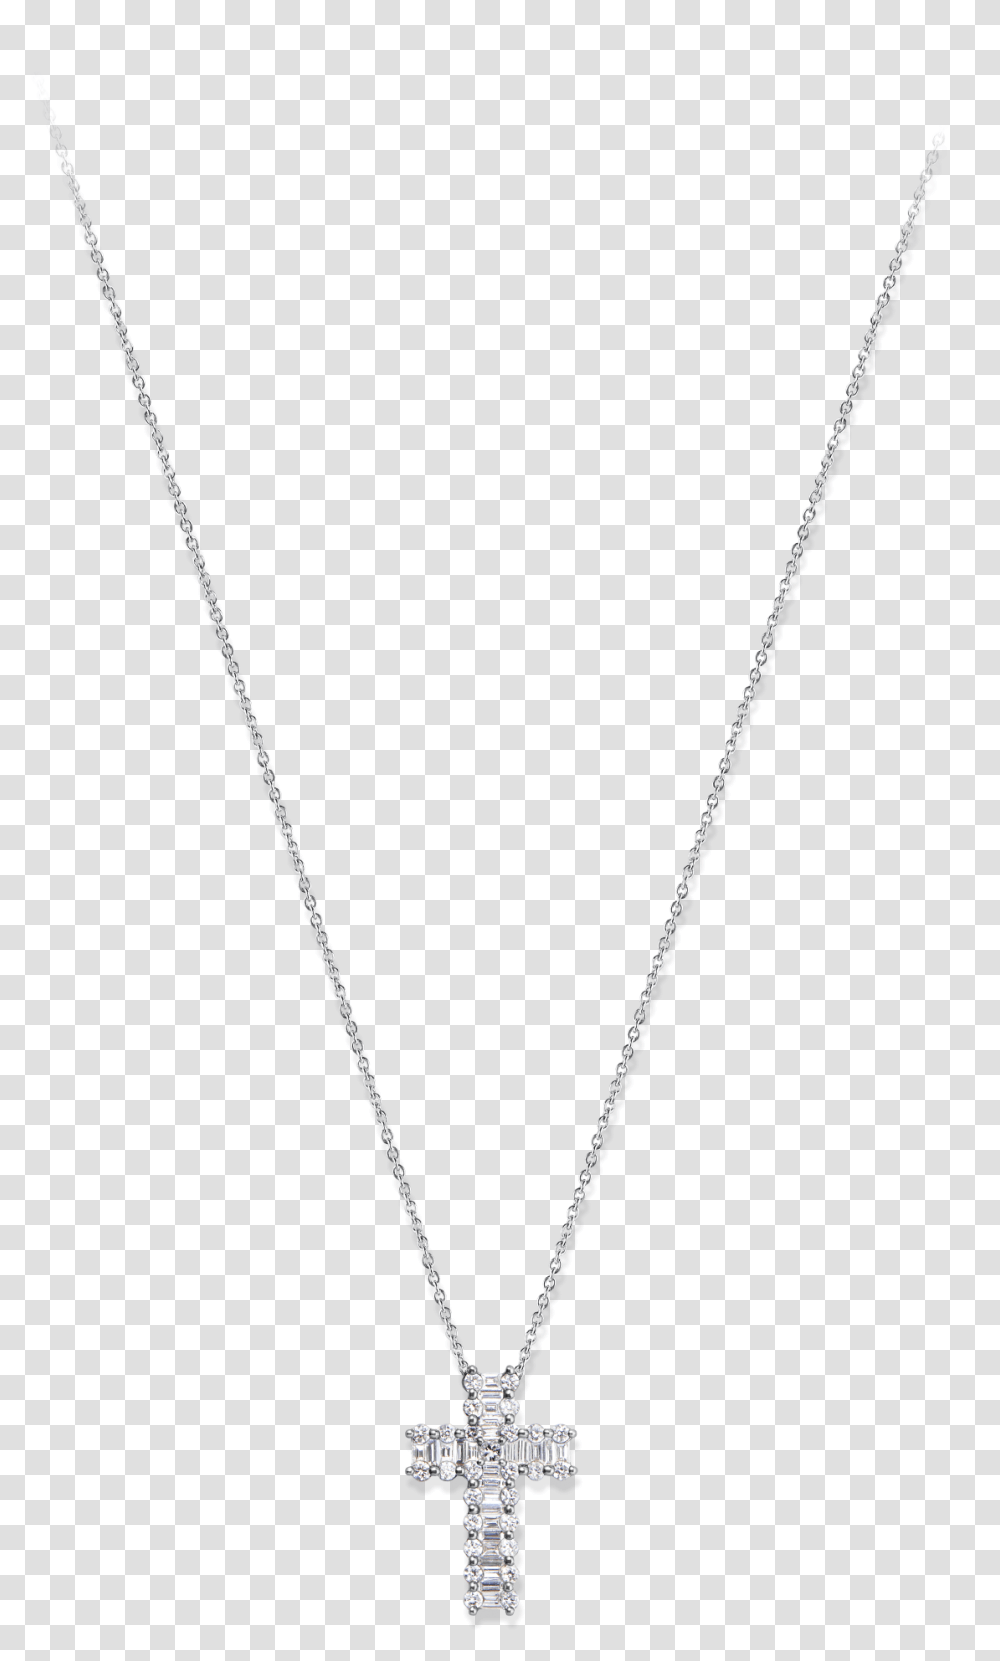 Jewellery Models Hd, Necklace, Jewelry, Accessories, Accessory Transparent Png